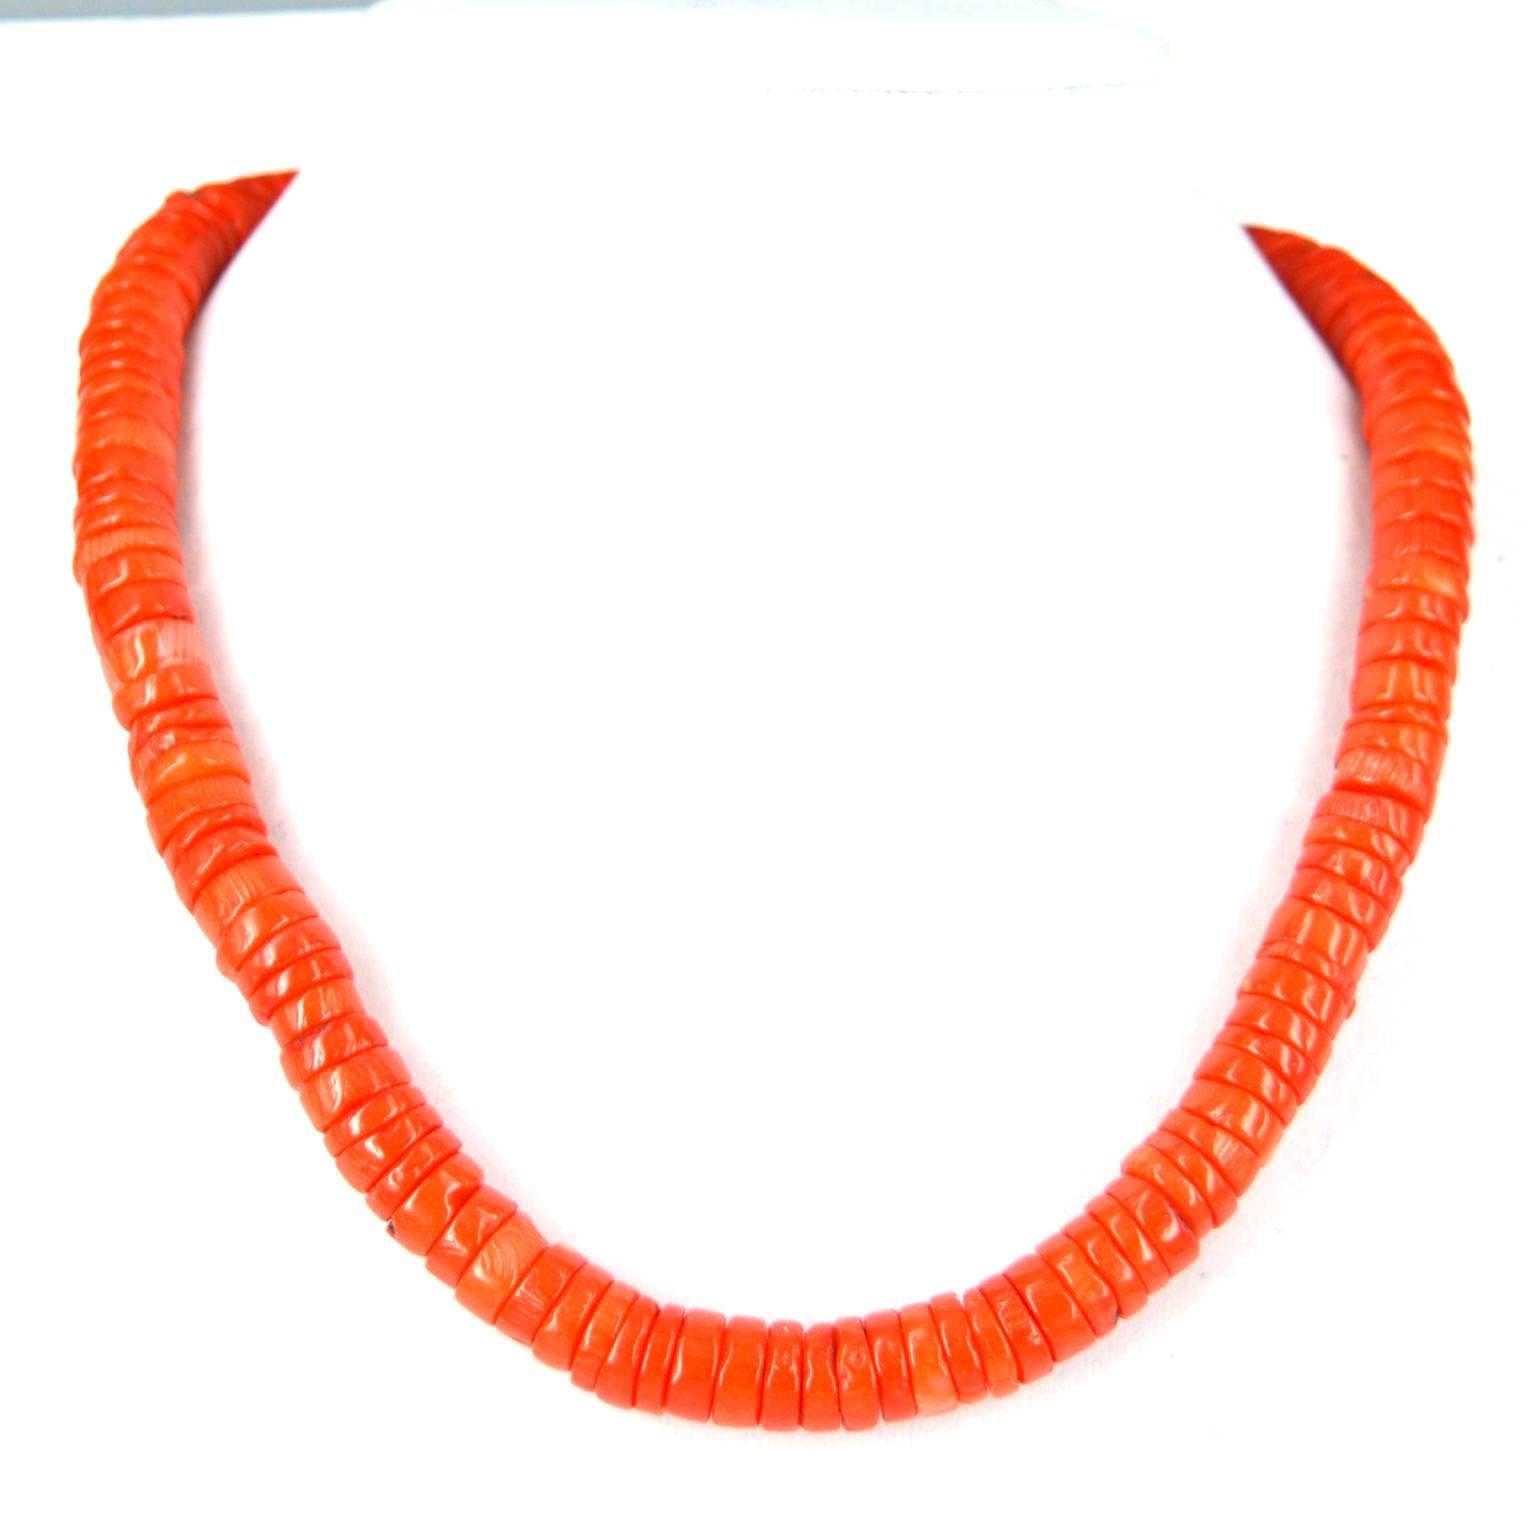 8mm Heishi Sea Bamboo Orange Coral with a 40mm Sterling Silver hook Clasp. Finished necklace measures 46cm.

Custom modification available on request

